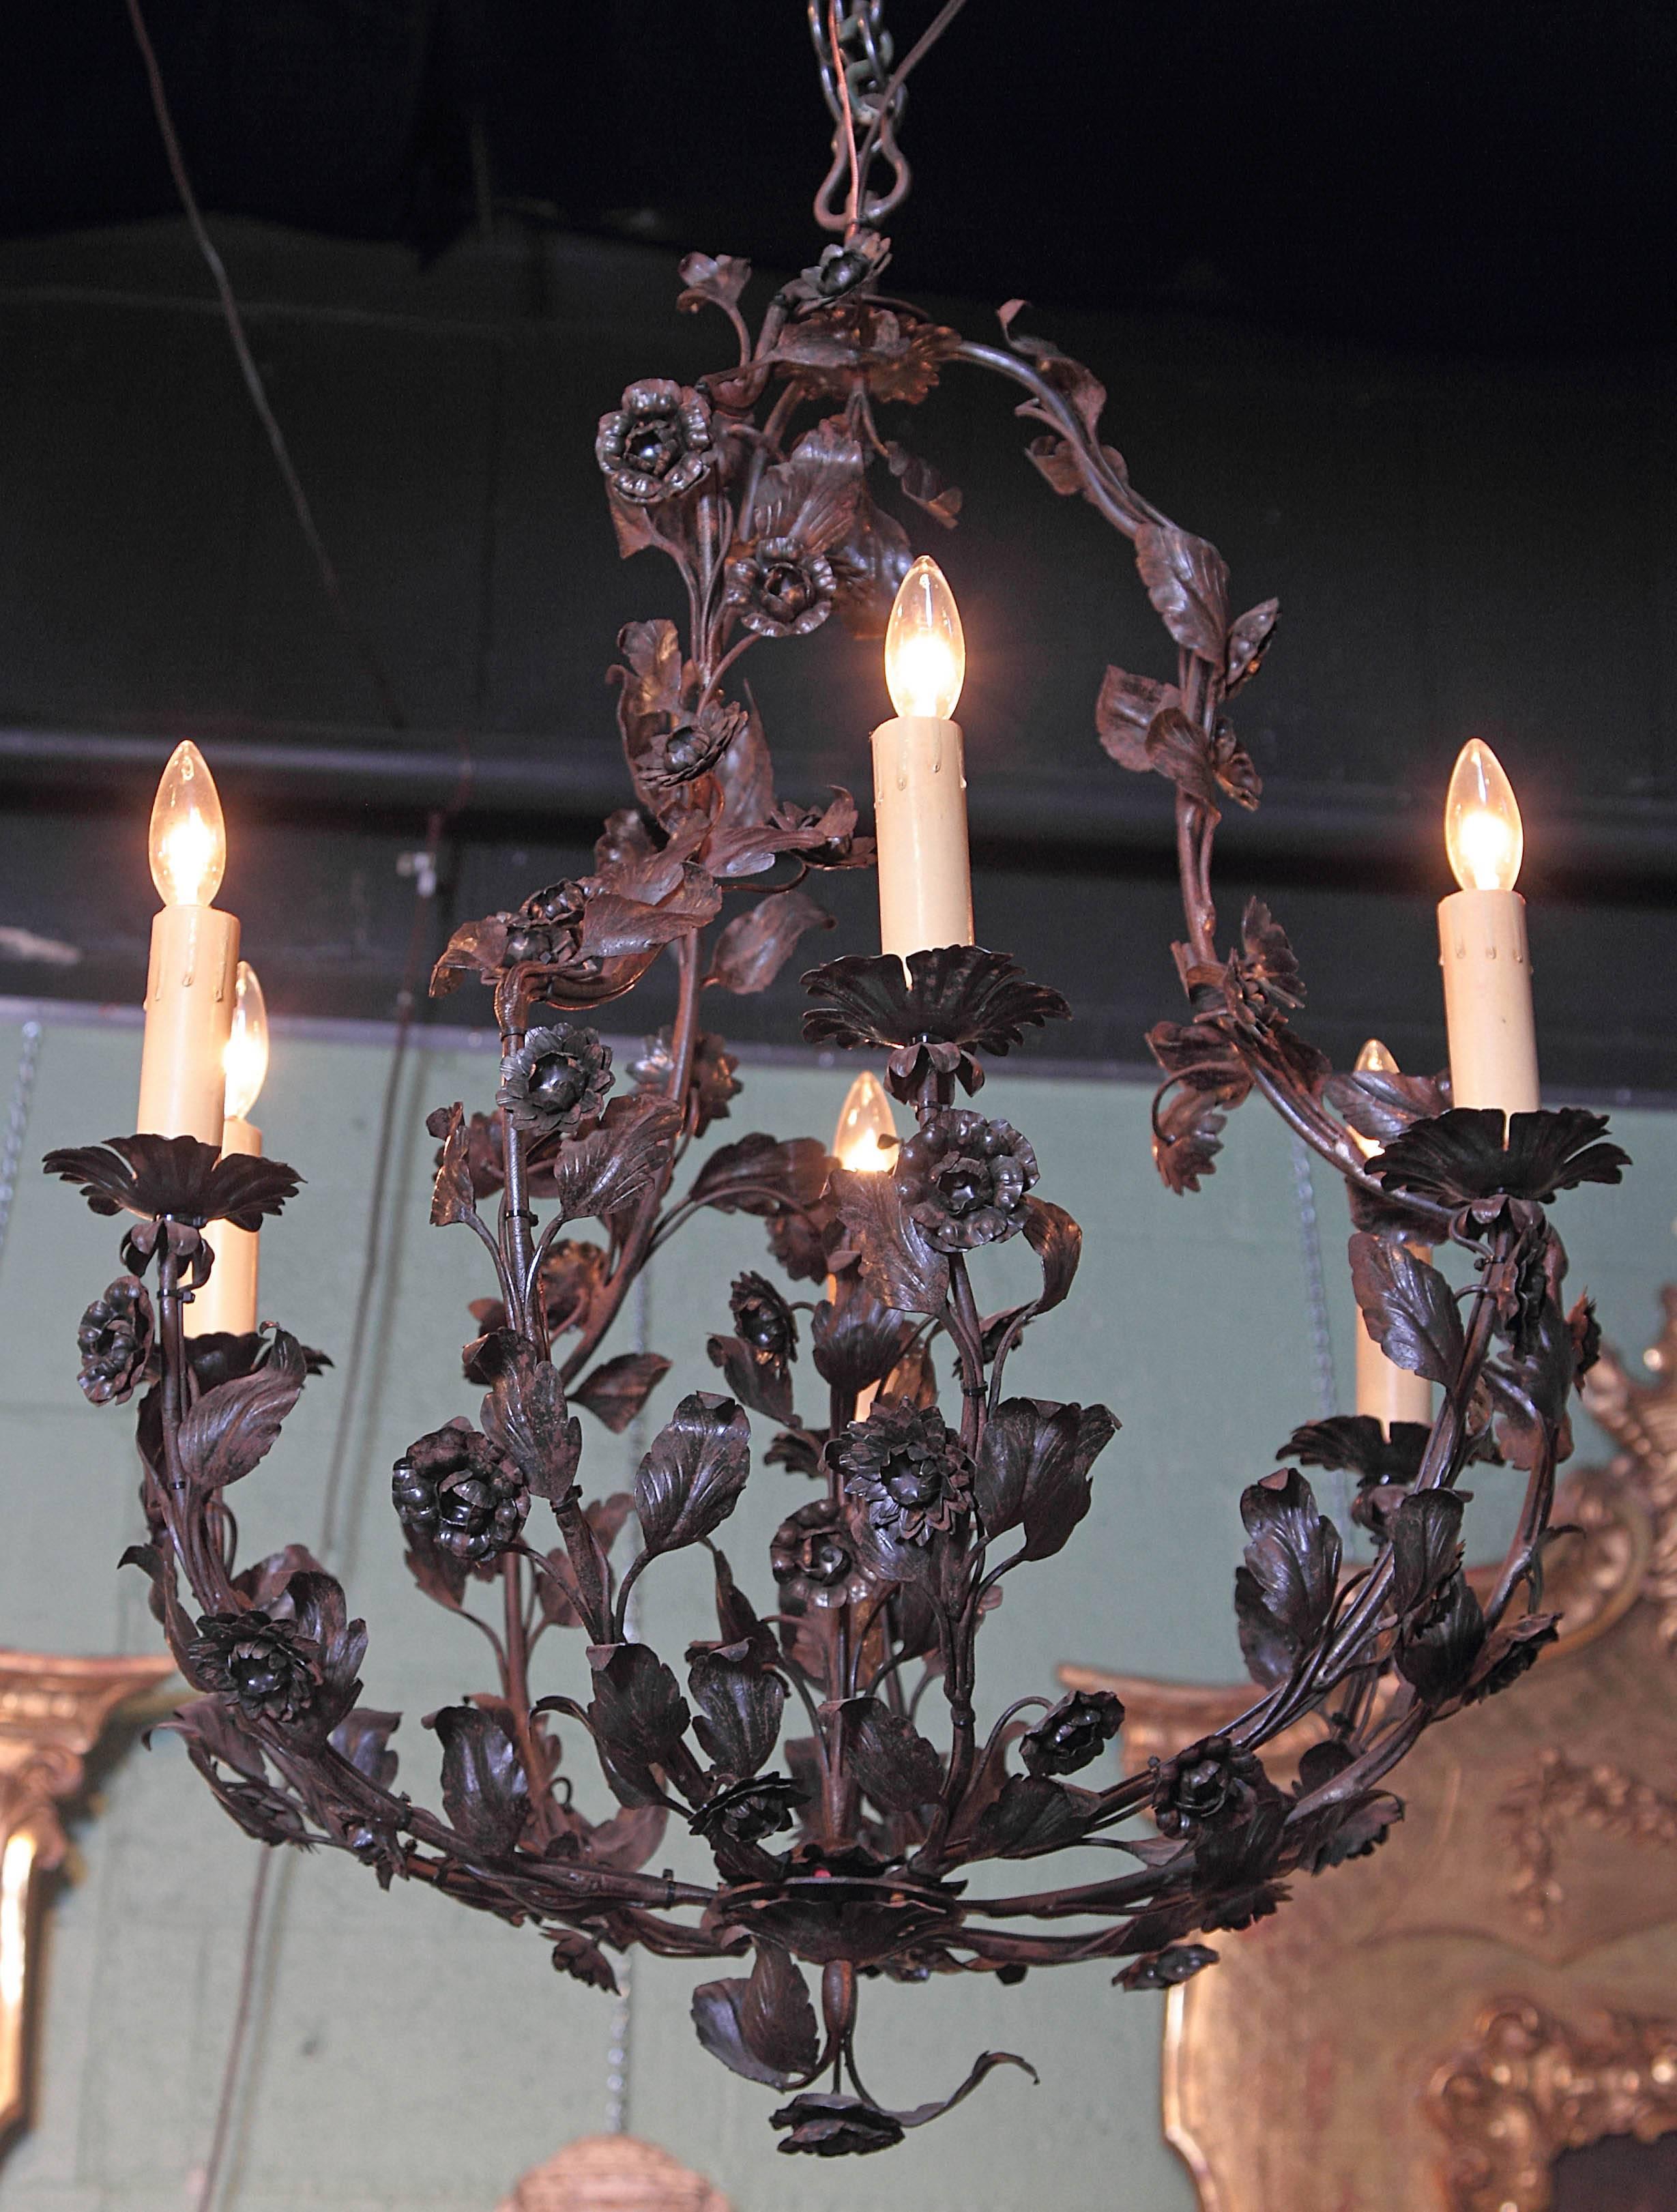 This elegant tole chandelier is rounded in shape and is beautifully embellished with over 100 tole flowers and leaves. Crafted in France, circa 1900, the fixture has a large centre finial and an organic, asymmetrical shape that stands out from the